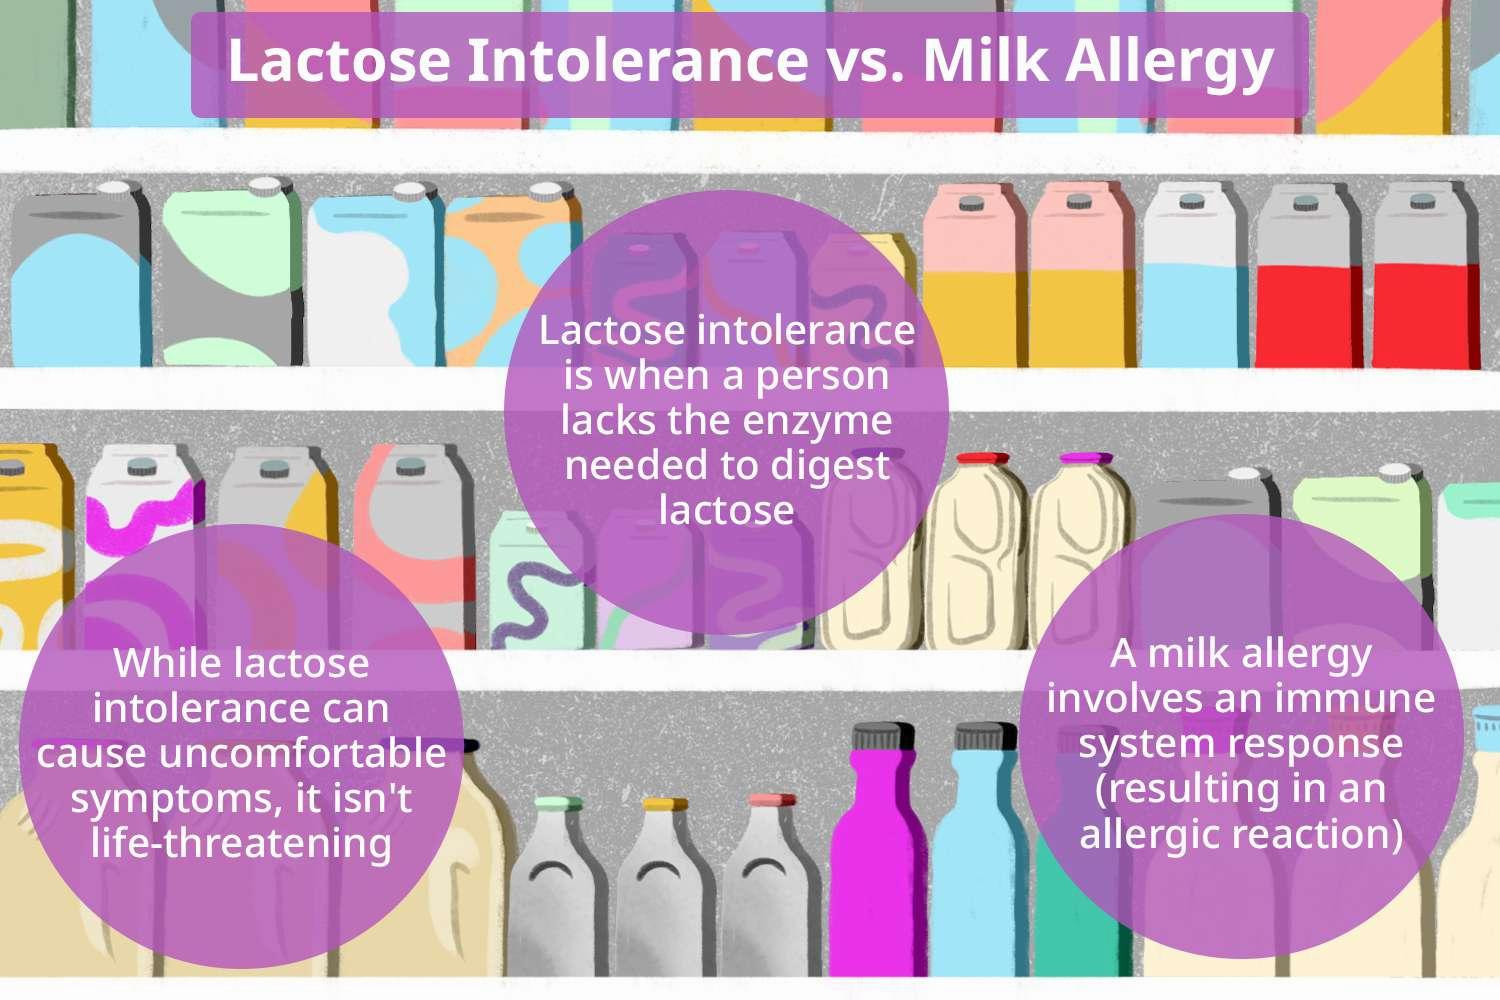 Lactose intolerance is when a person lacks the enzyme needed to digest lactose, while a milk allergy involves an immune system response.